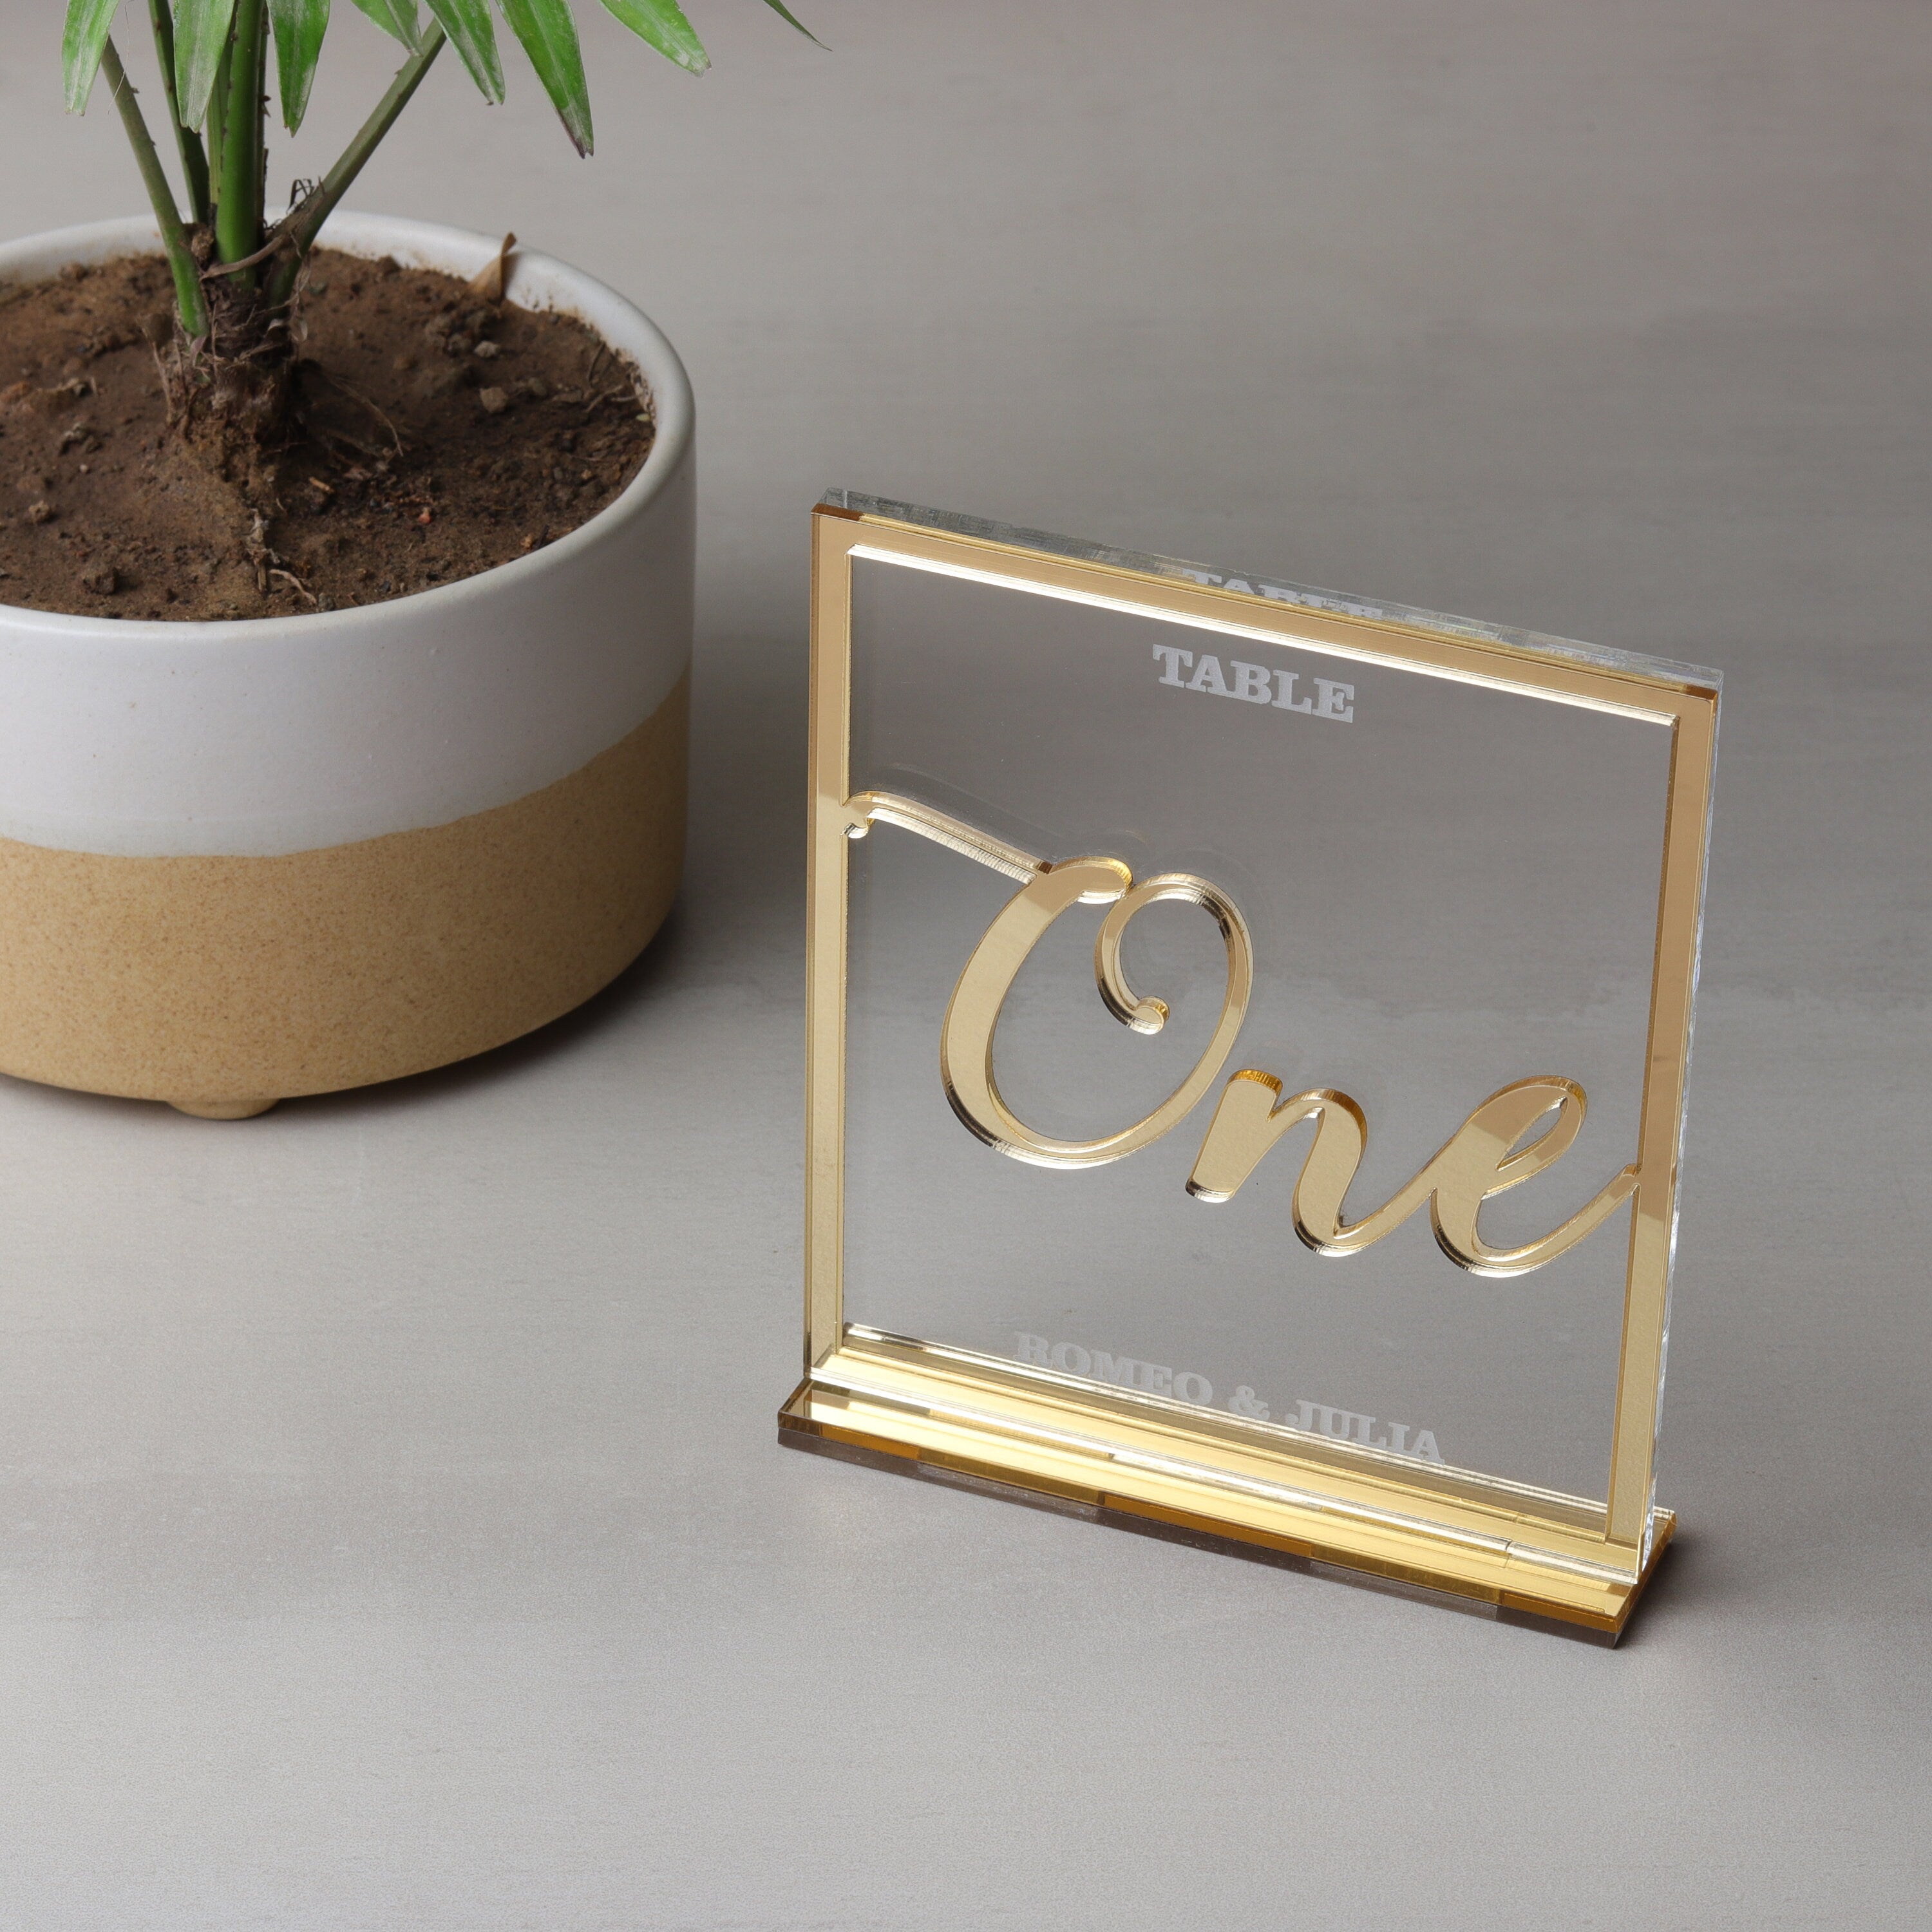 Gold Table Numbers | Table Numbers | Acrylic Table Numbers | Table Number Wedding , Centerpieces Luxury Decorations, Wedding Table Number